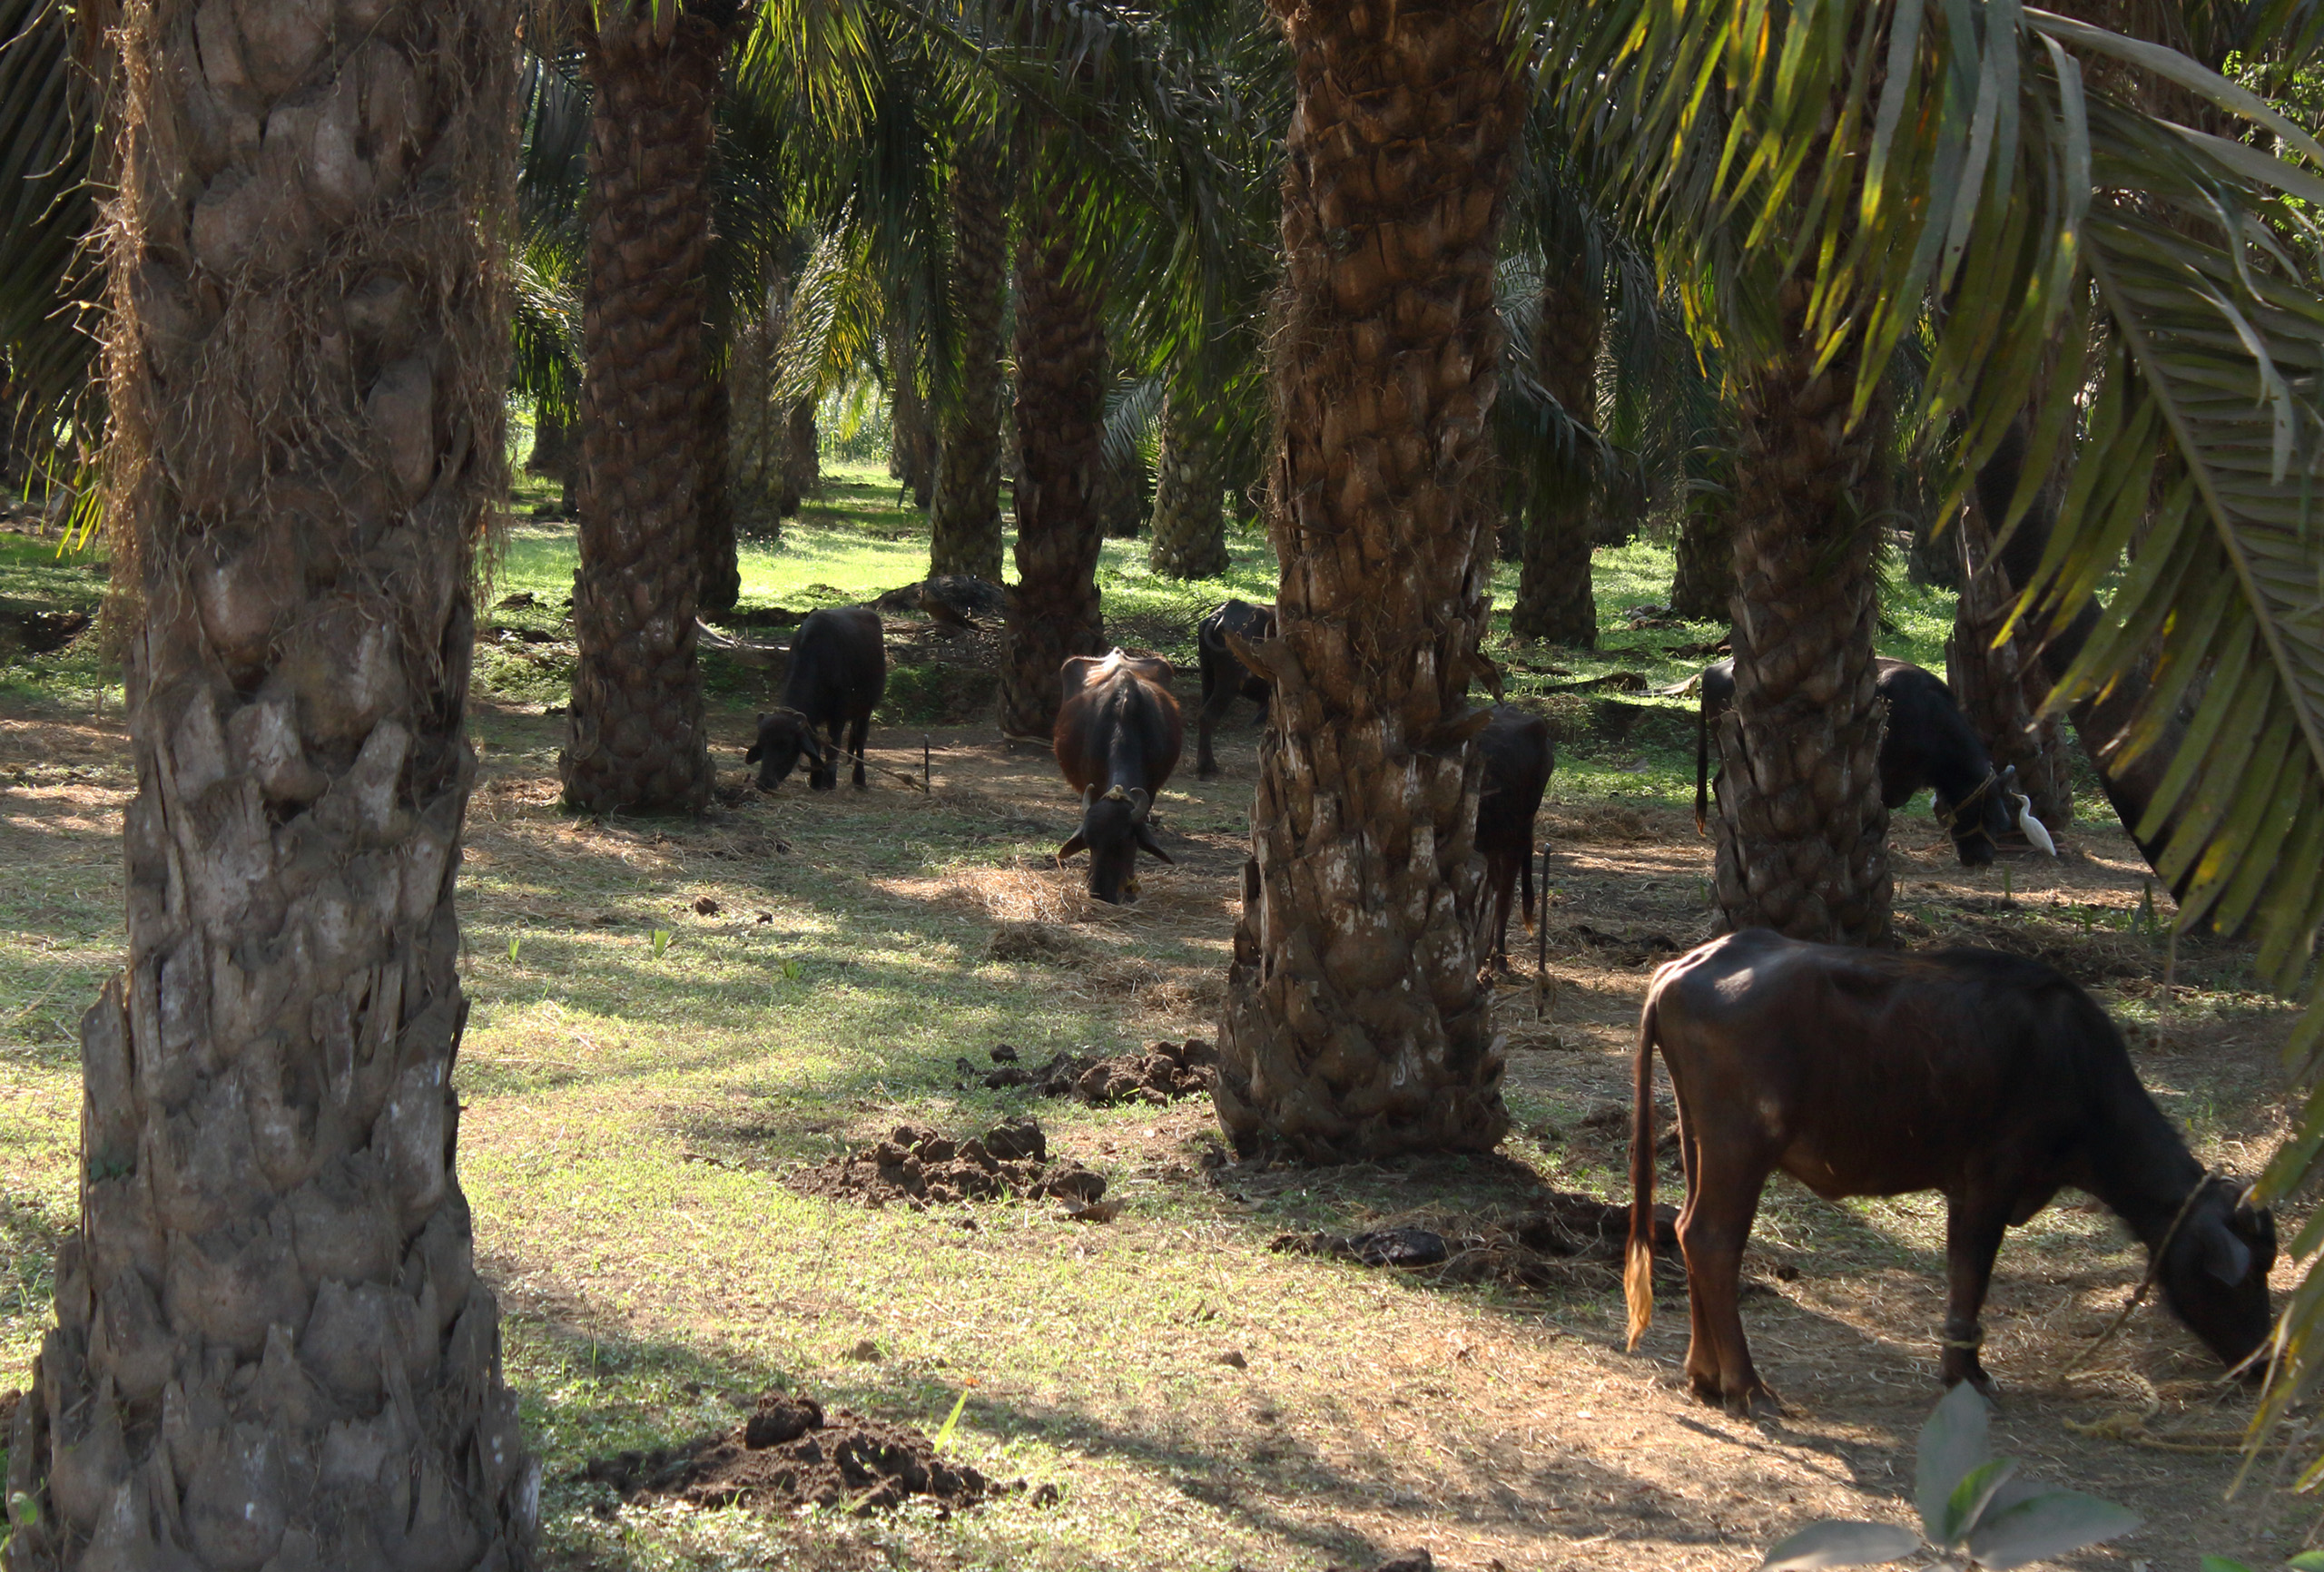 Cattle graze on oil palm plantations in Andhra Pradesh, Kevin Samuel / China Dialogue